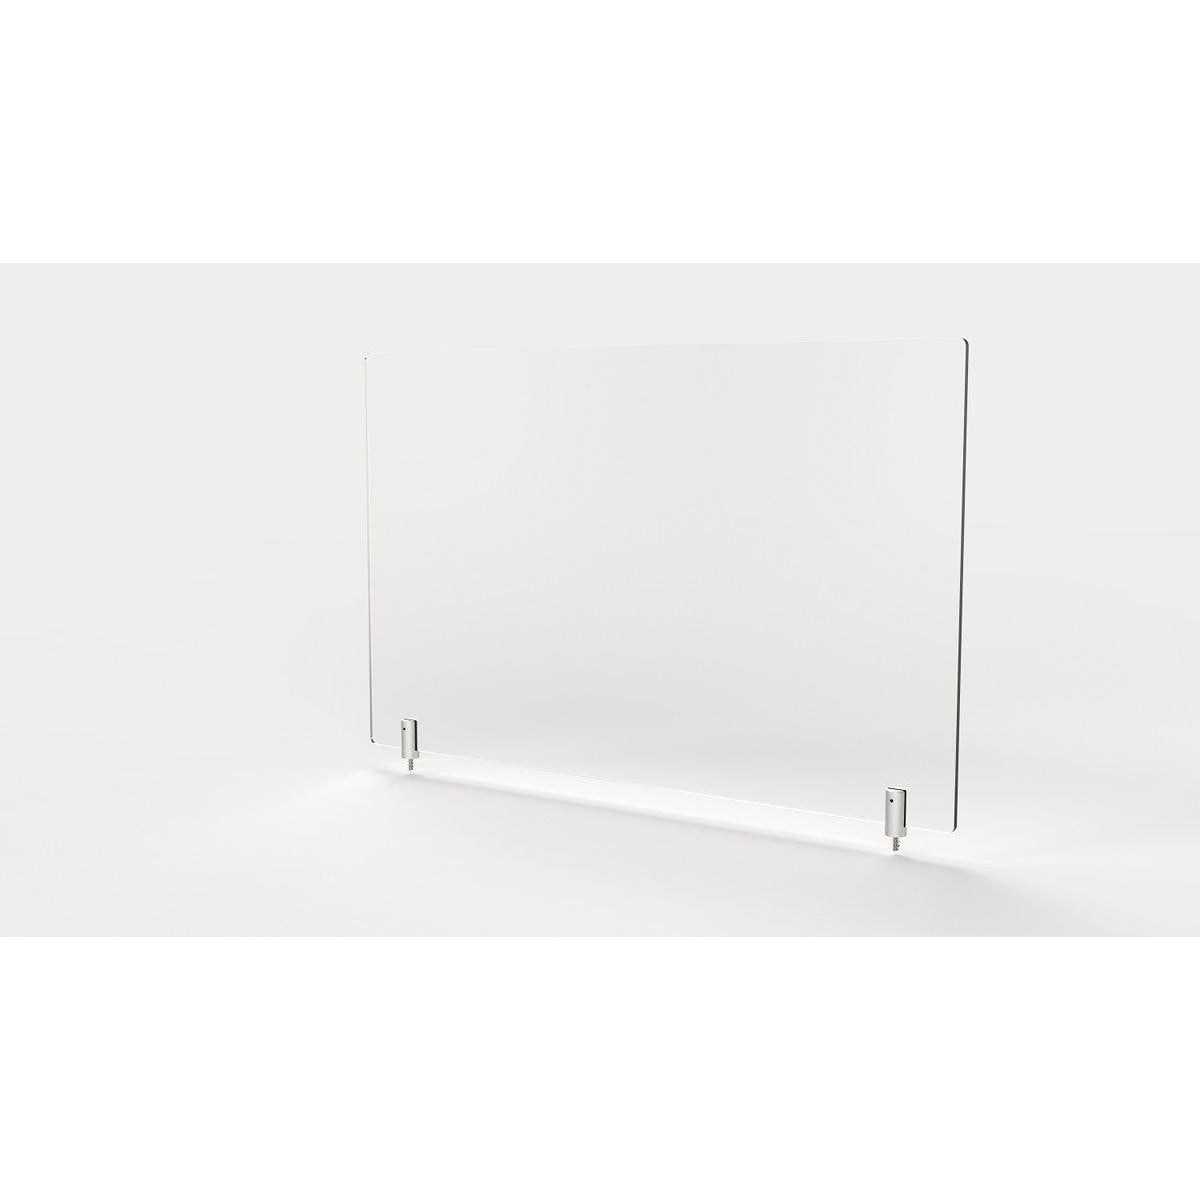 Frosted Thermoplastic Partition & Cubicle Extender with Permanent Screw Attachment, 30"H x 29"W